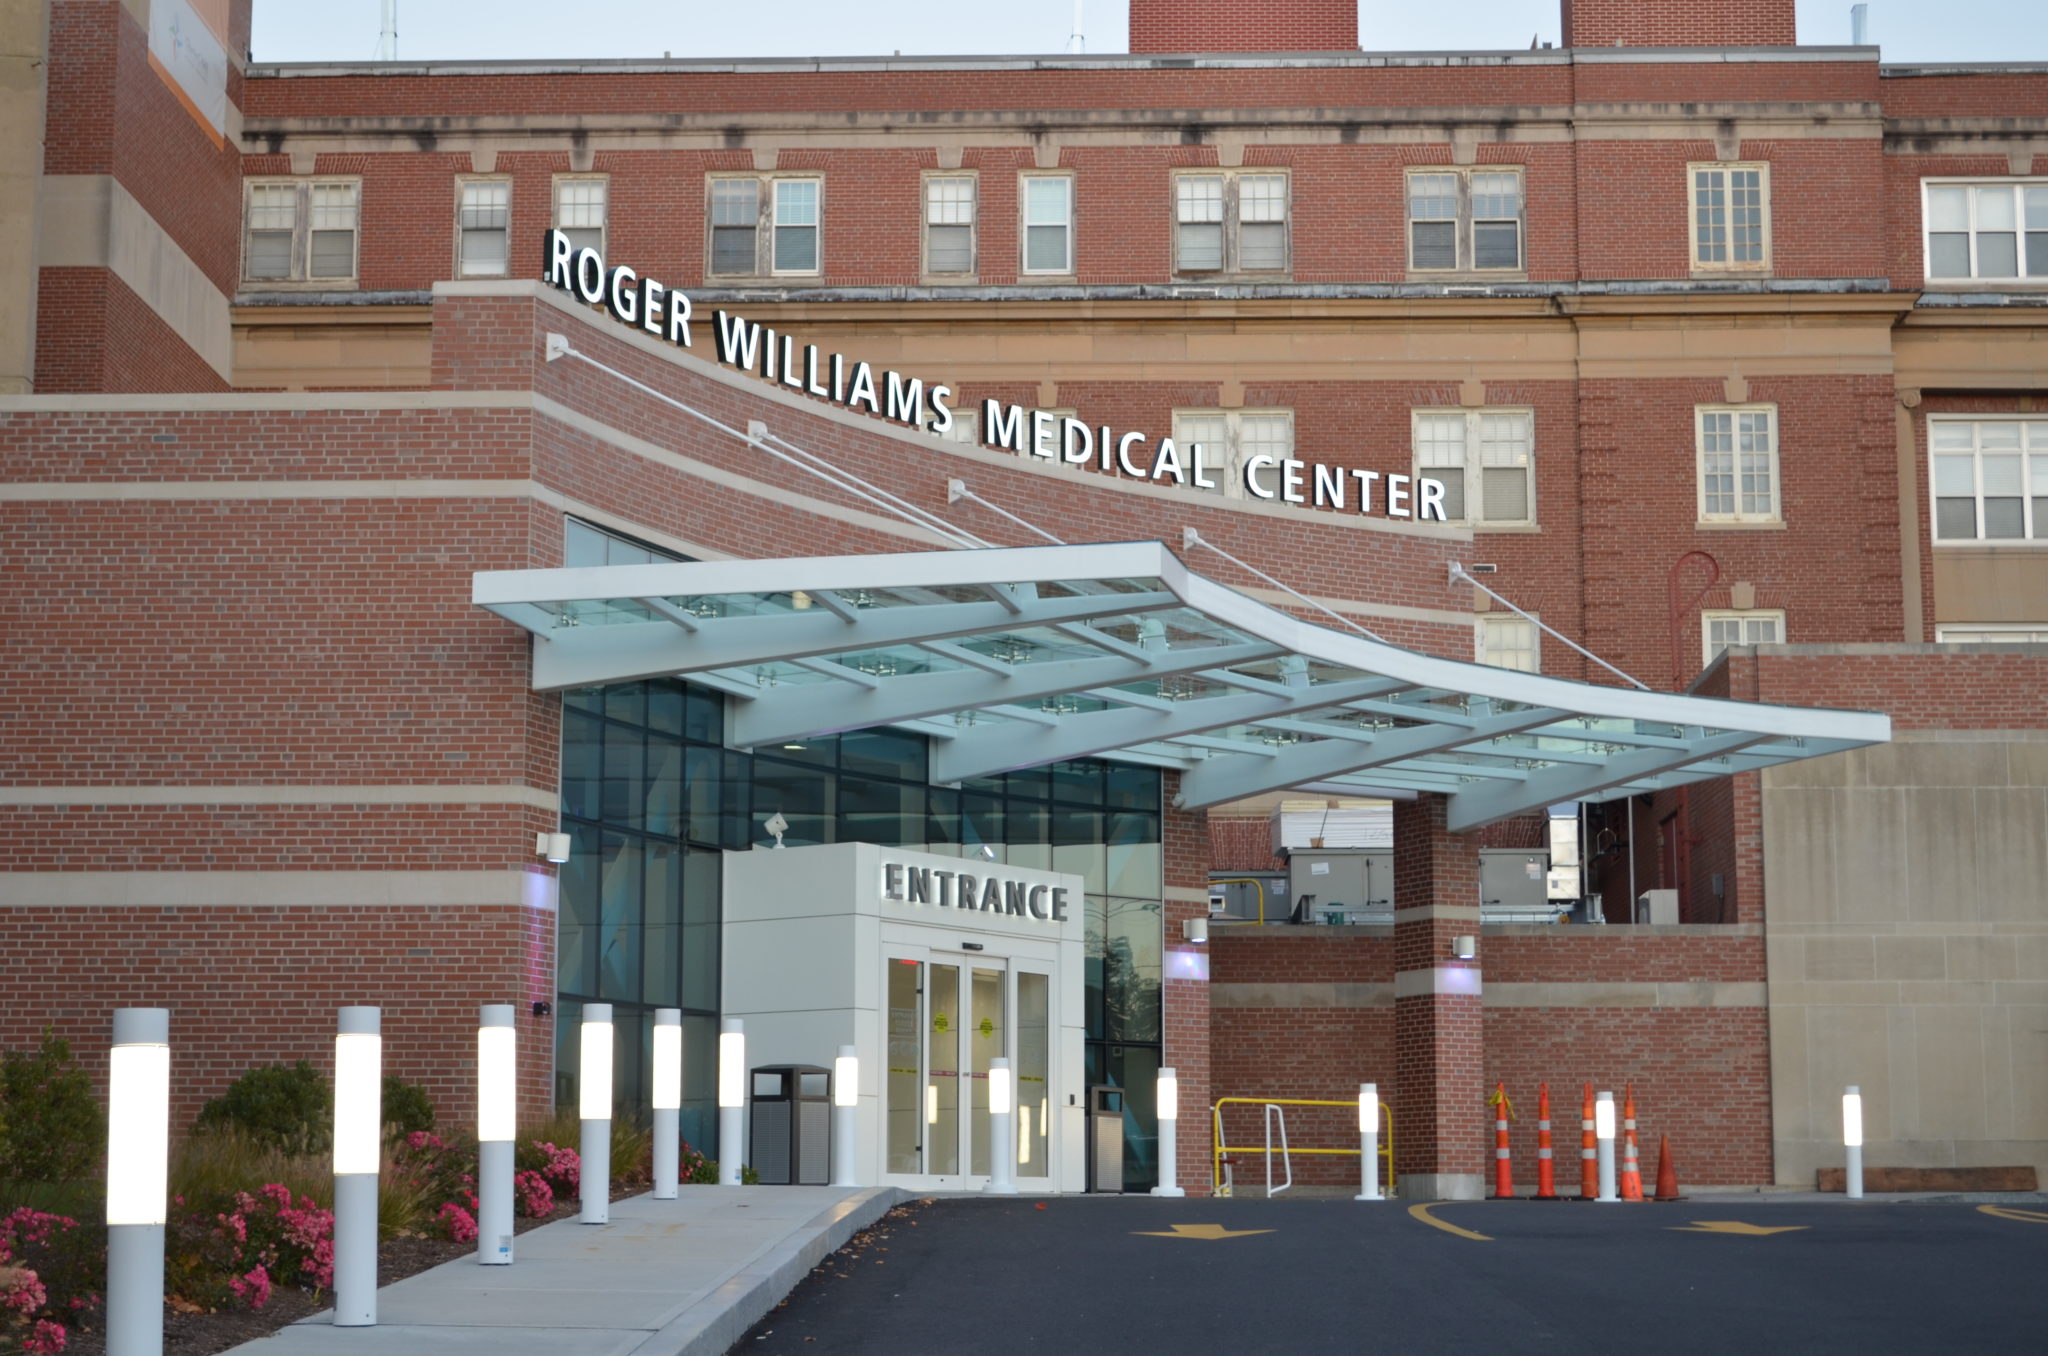 ROGER WILLIAMS MEDICAL CENTER is one of four Rhode Island hospital that received an A grade in the Leapfrog patient safety report for the spring of 2017.